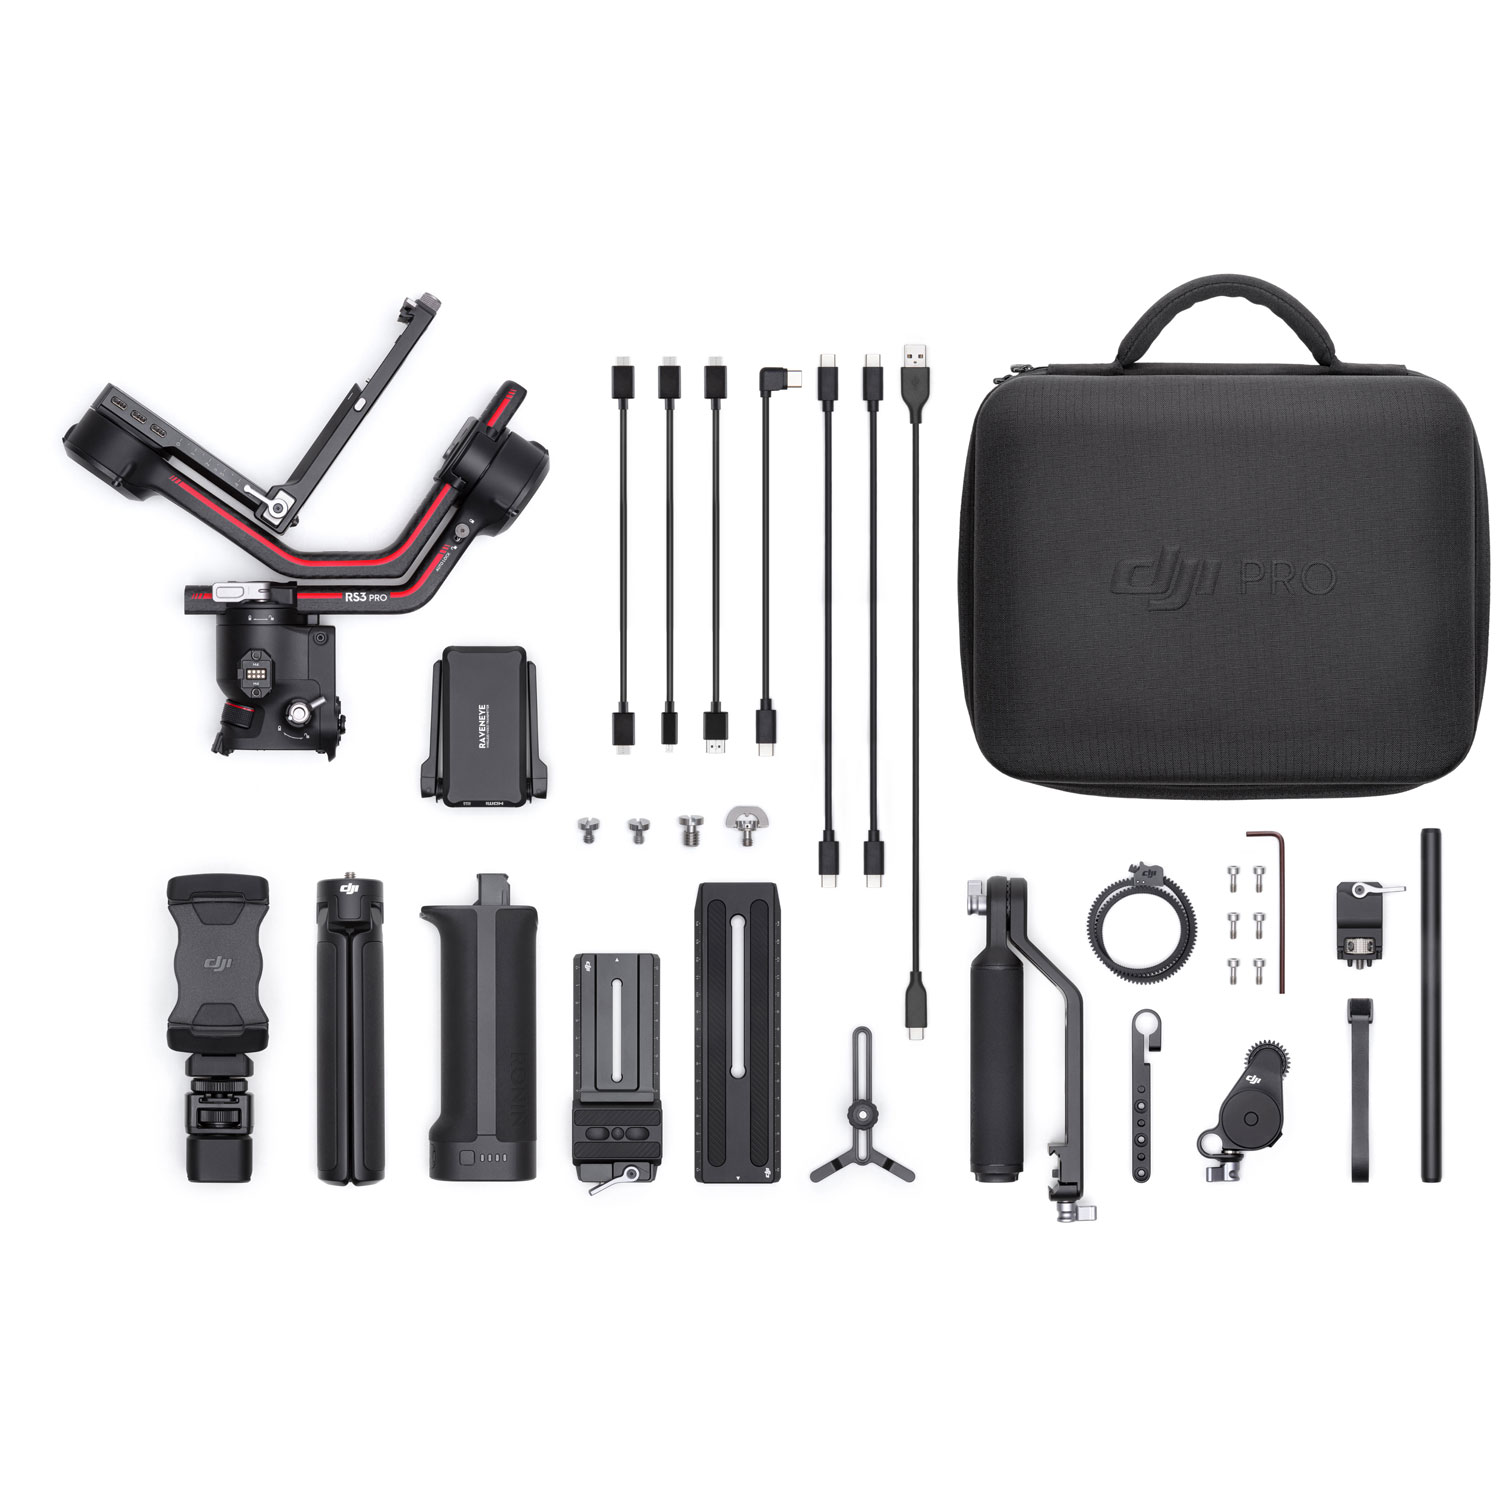 DJI RS 3 Combo 3-Axis Gimbal Stabilizer - Black | Best Buy Canada